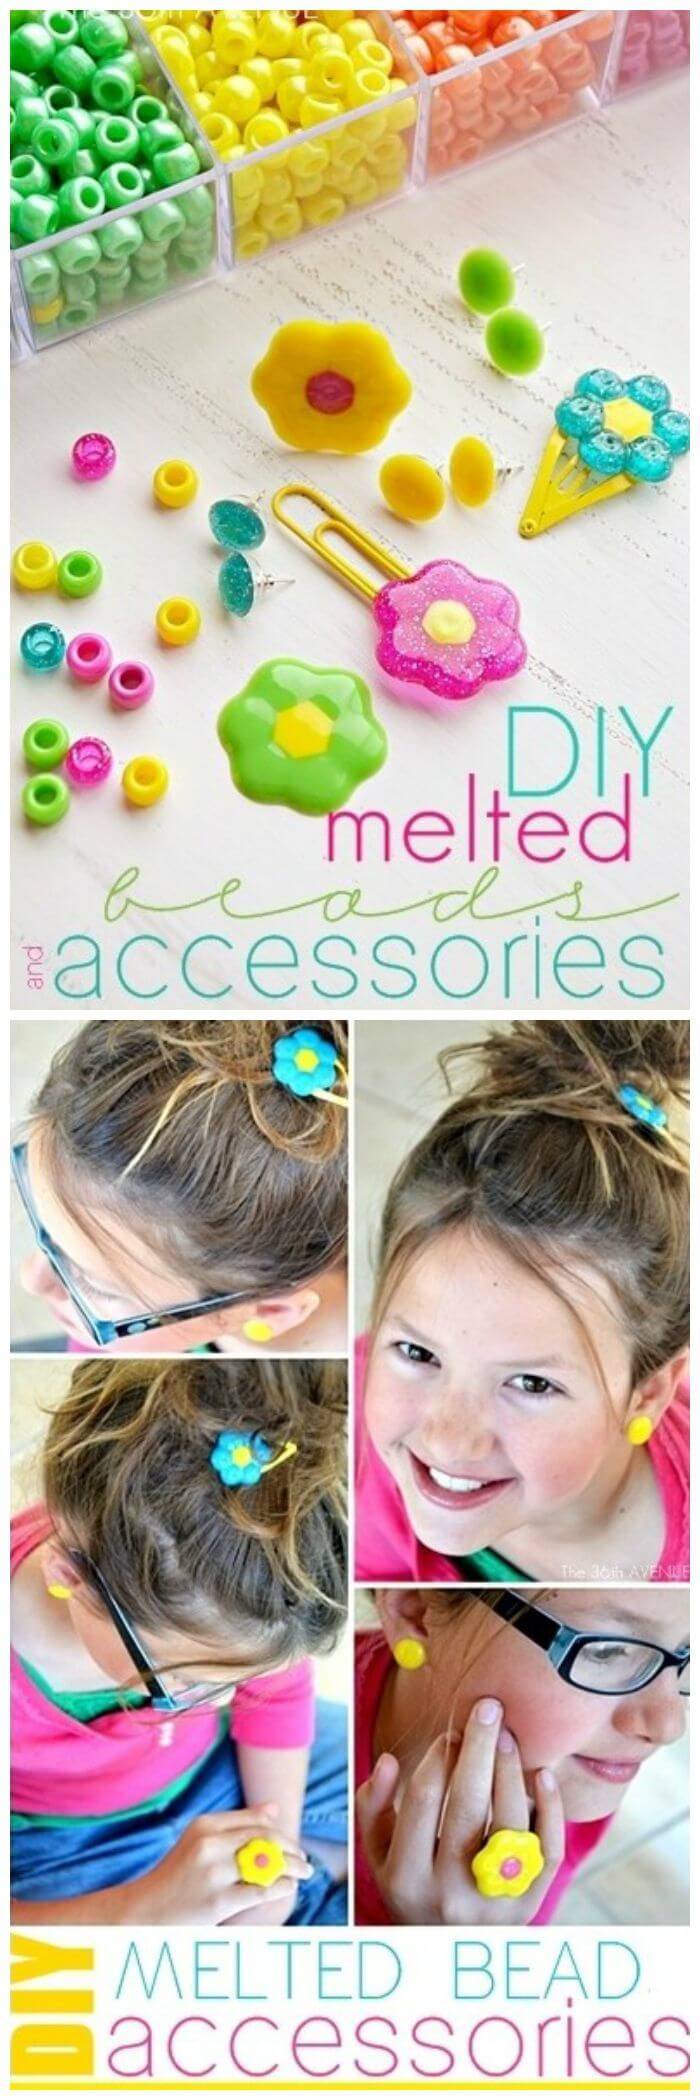 DIY Dollar Store Melted Beads And Accessories - Dollar Store Craft 